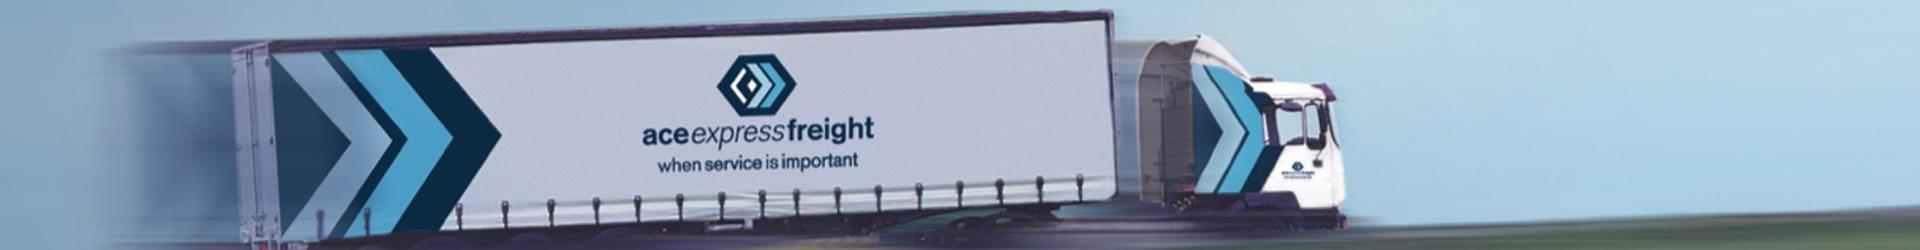 Road freight image